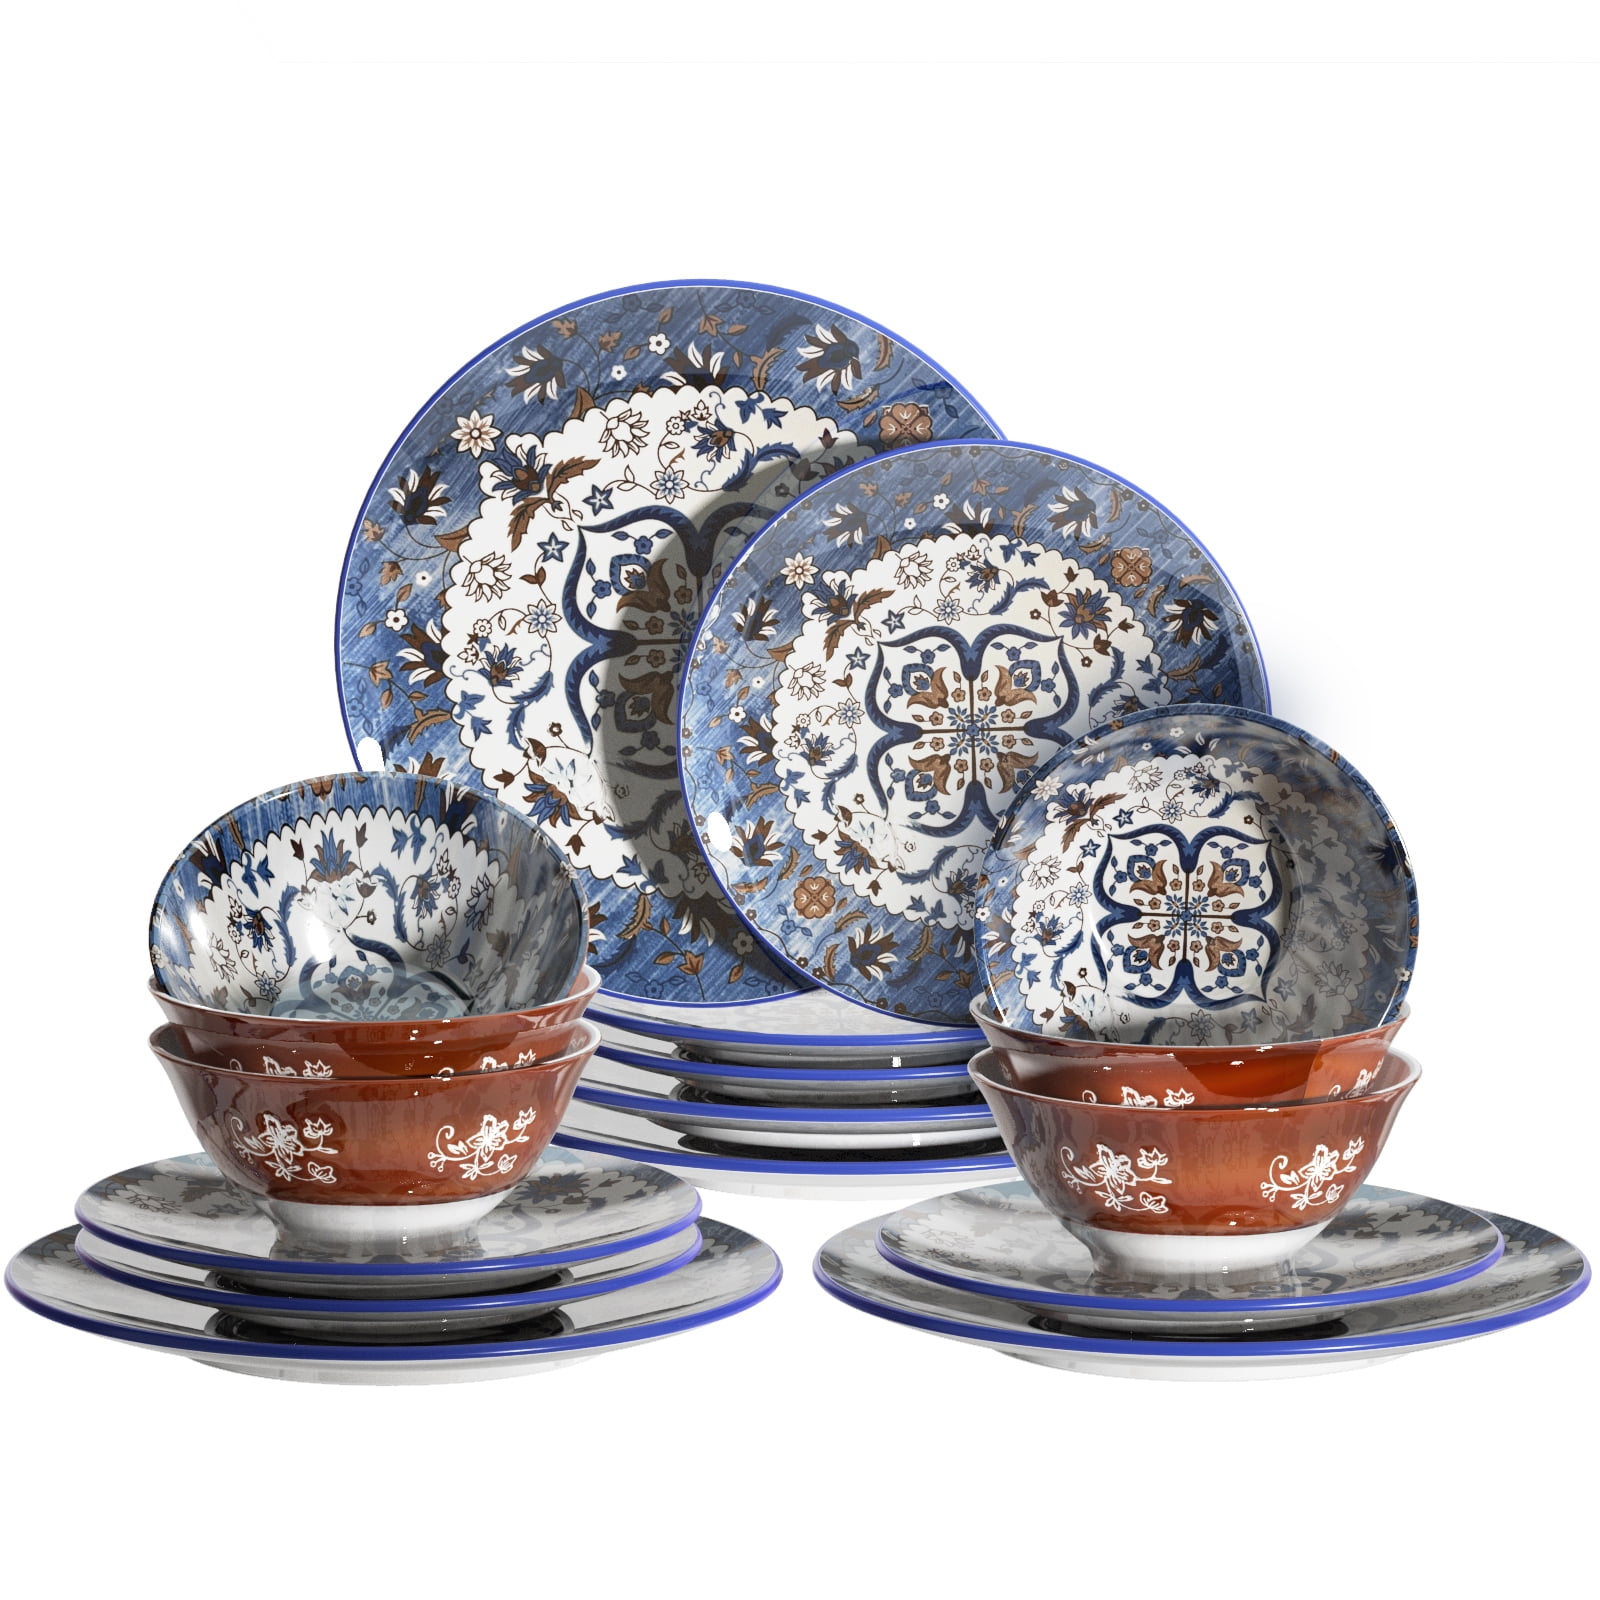 Slaouwo 18-piece Kitchen Dinner Sets with 10.5 Dinner Plate Party 8.5 Dessert Plate and 6.25 Bowl,Kitchen Dishes Sets for Family Porcelain Dinnerware Set for 6 